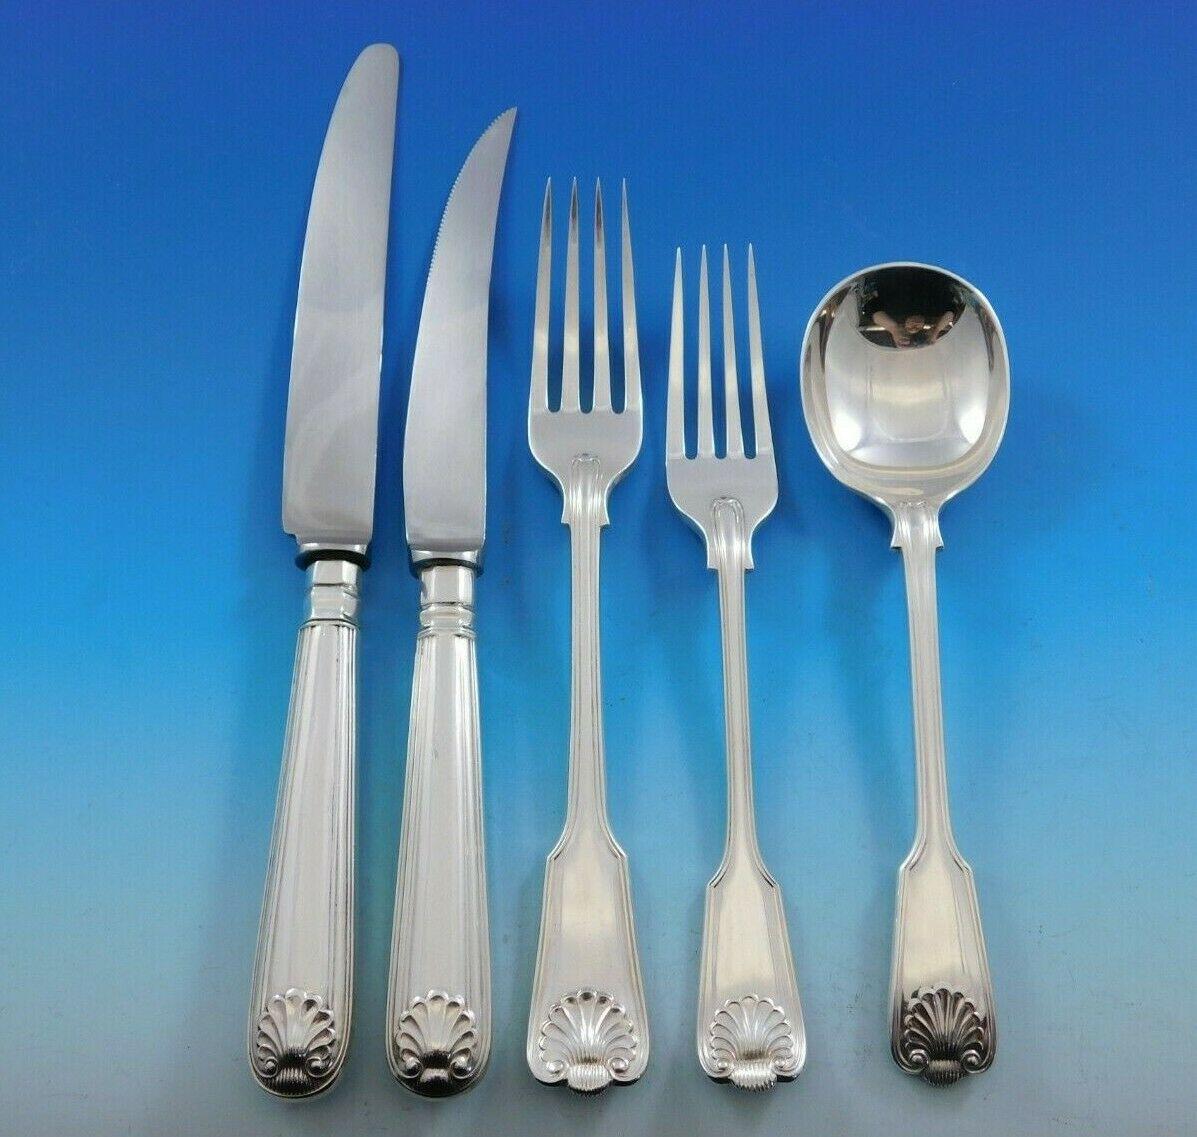 Superb dinner size fiddle thread and shell by James Robinson Sterling Silver Flatware set, 48 pieces. This set includes:

8 dinner size knives, 9 1/2